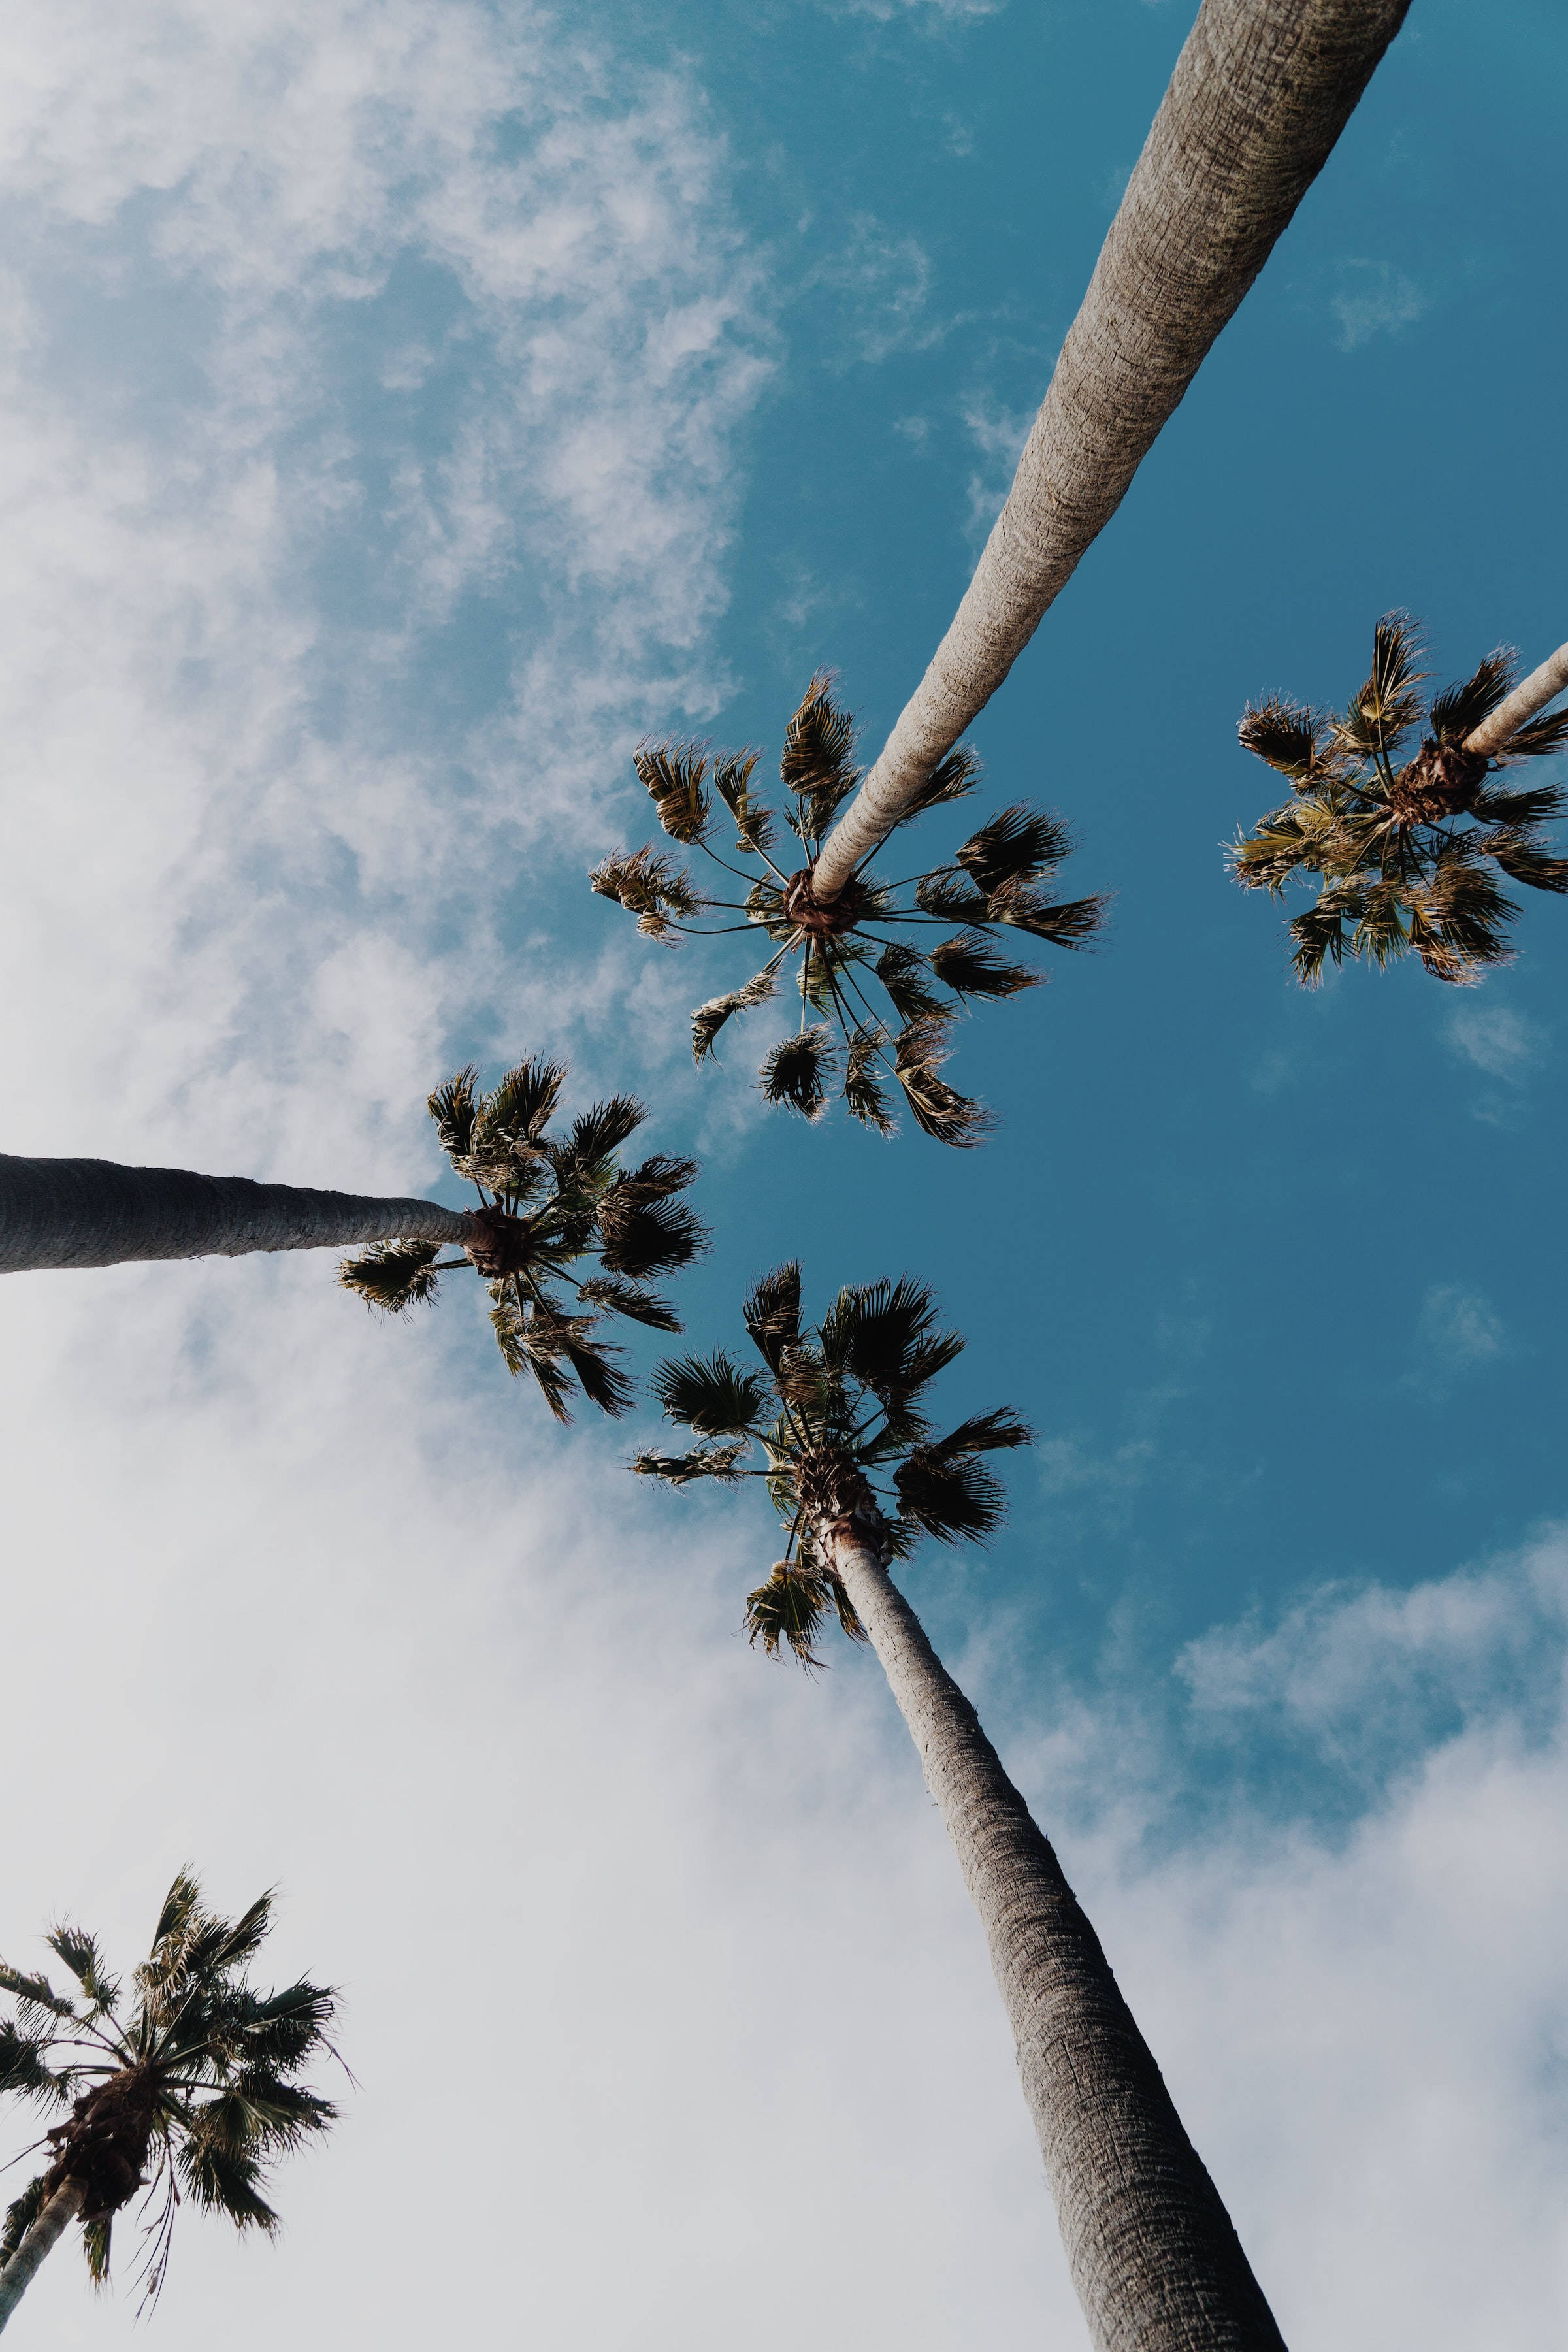 A group of palm trees with a blue sky in the background. - Coconut, palm tree